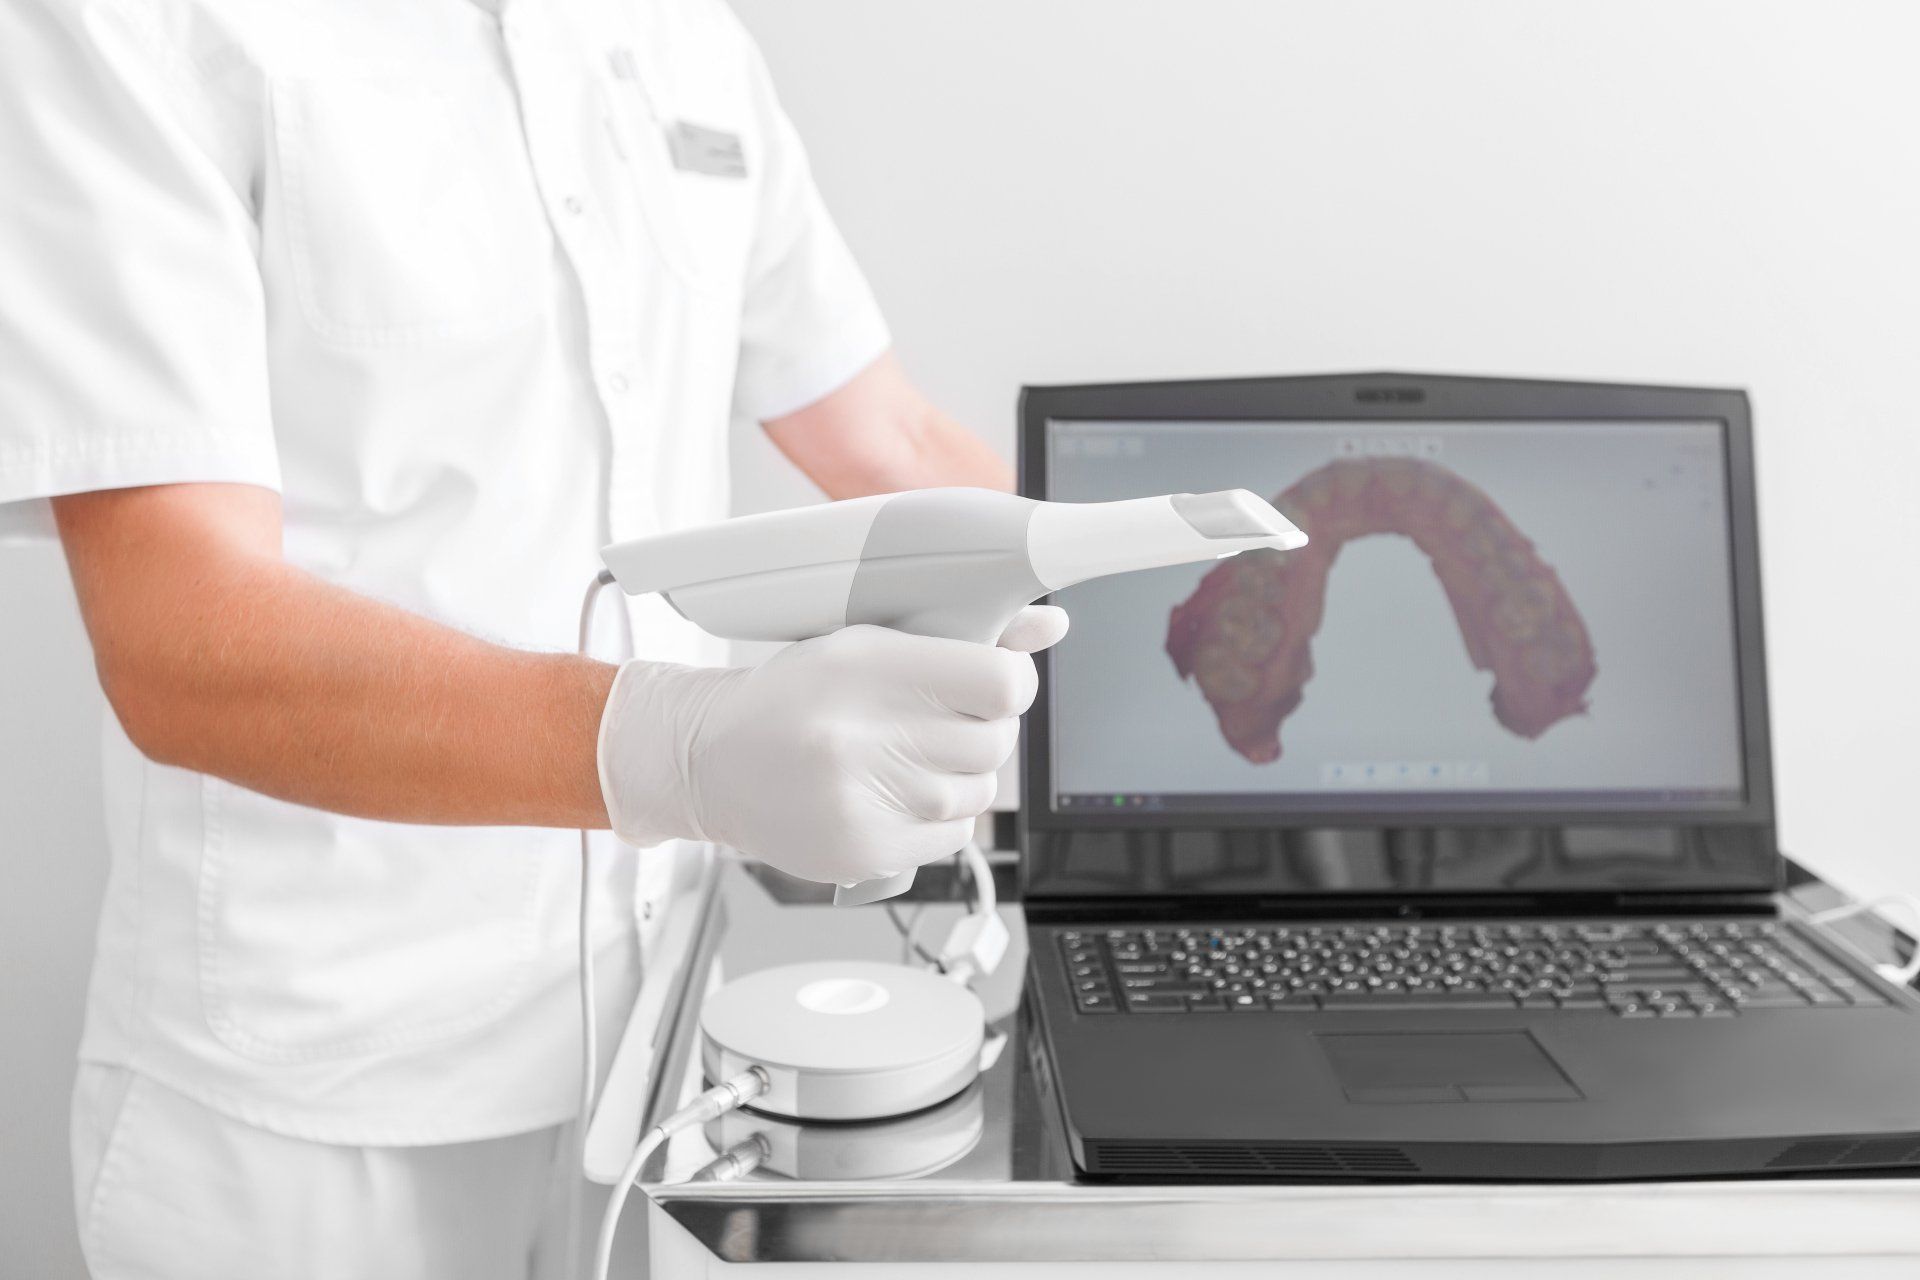 Dental technology | Dental 3D scanner | dentist near you | man holding scanner in front of a computer | Complete Dental and Orthodontics | Best Dentist and Orthodontist in Fresno, California